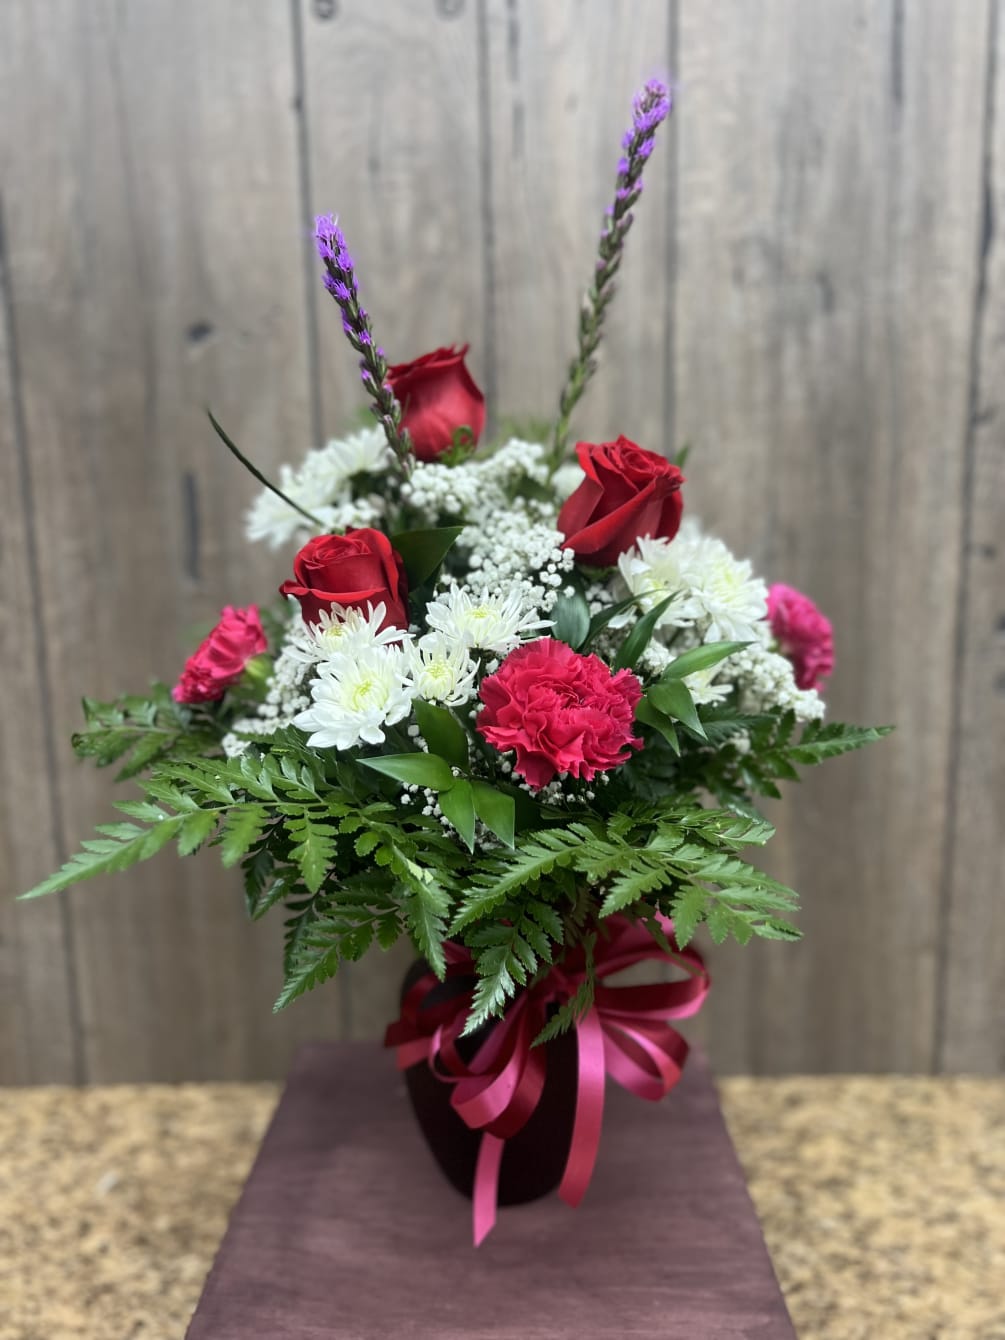 Red roses mixed with red, white, pink, and purple flowers in a